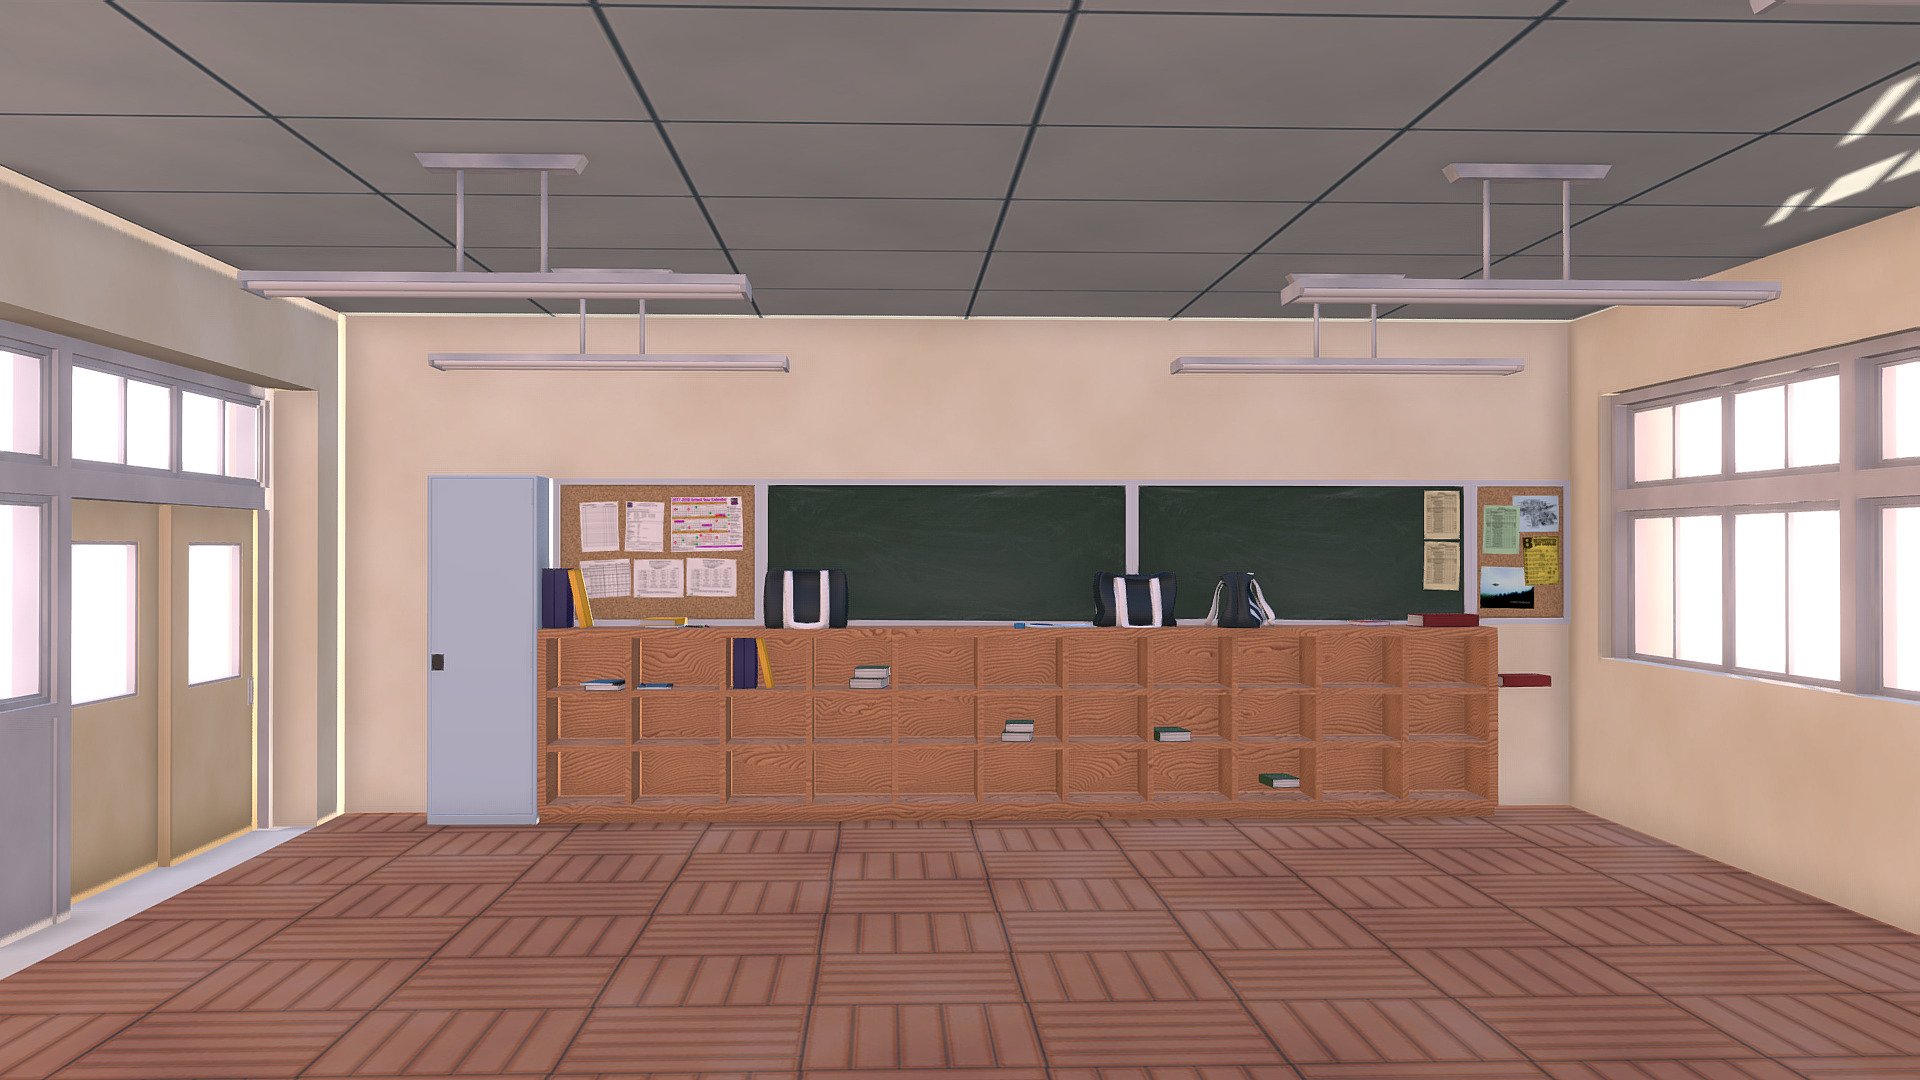 Anime Classroom Asset Pack in Environments - UE Marketplace-demhanvico.com.vn